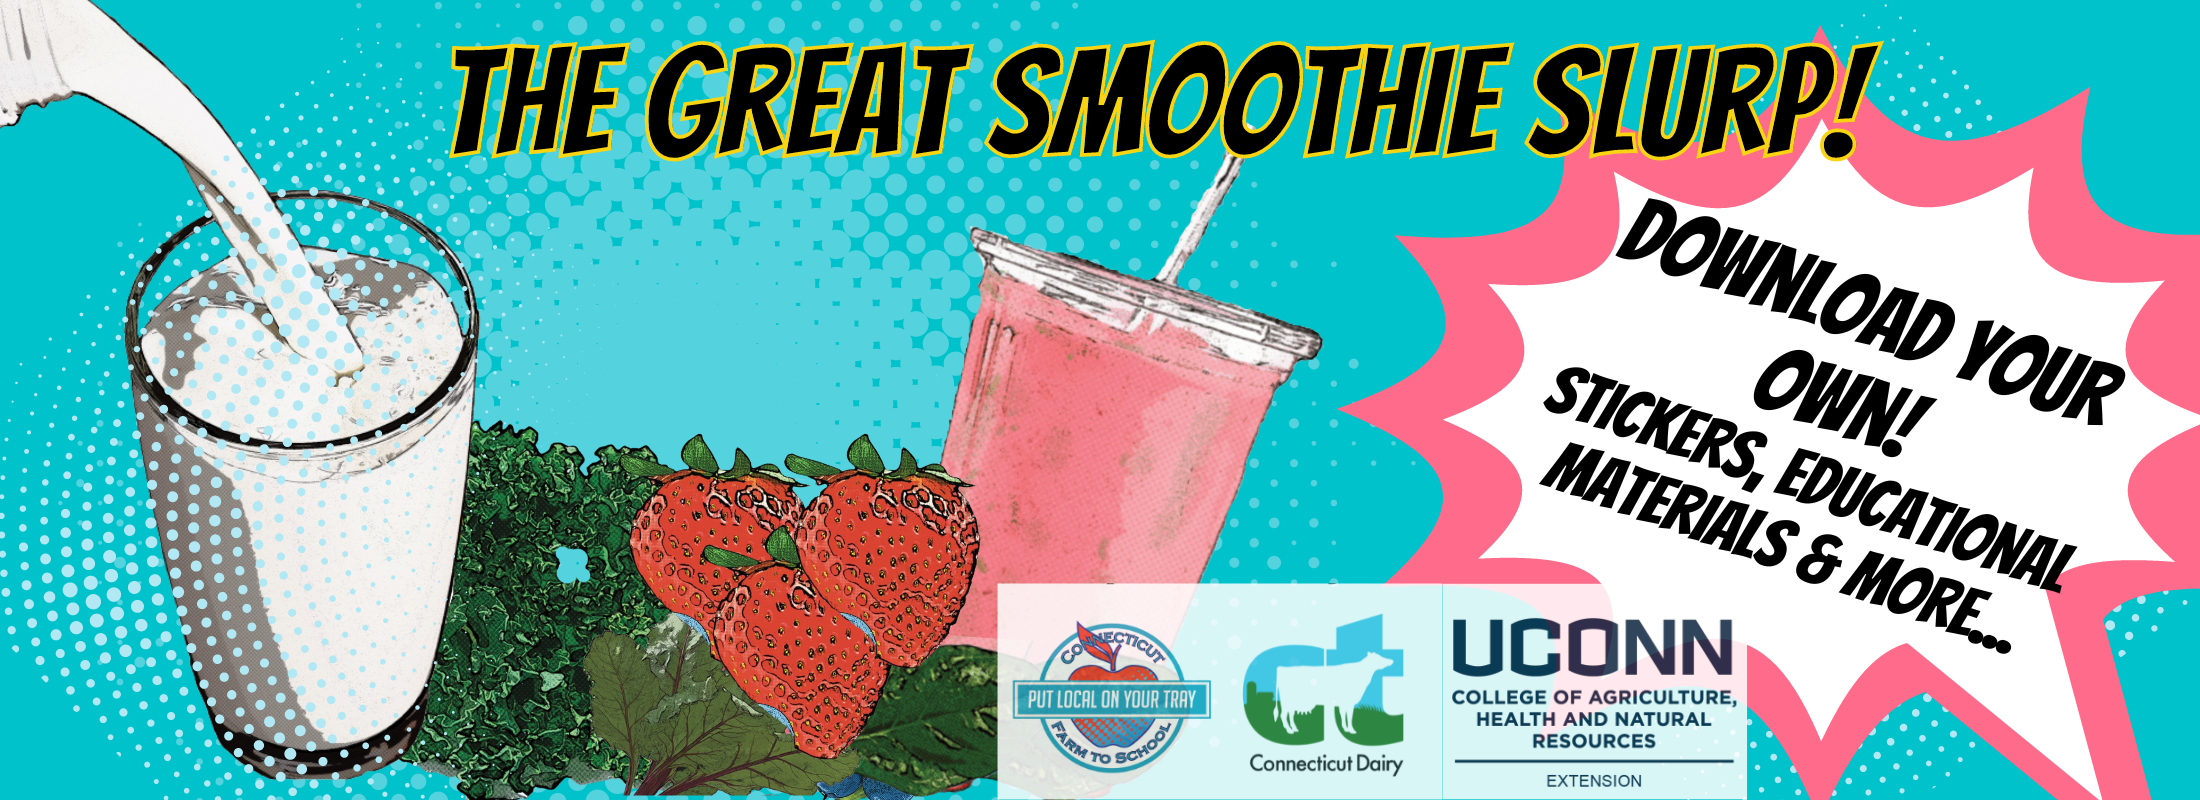 The Great Smoothie Slurp: Download your own materials below